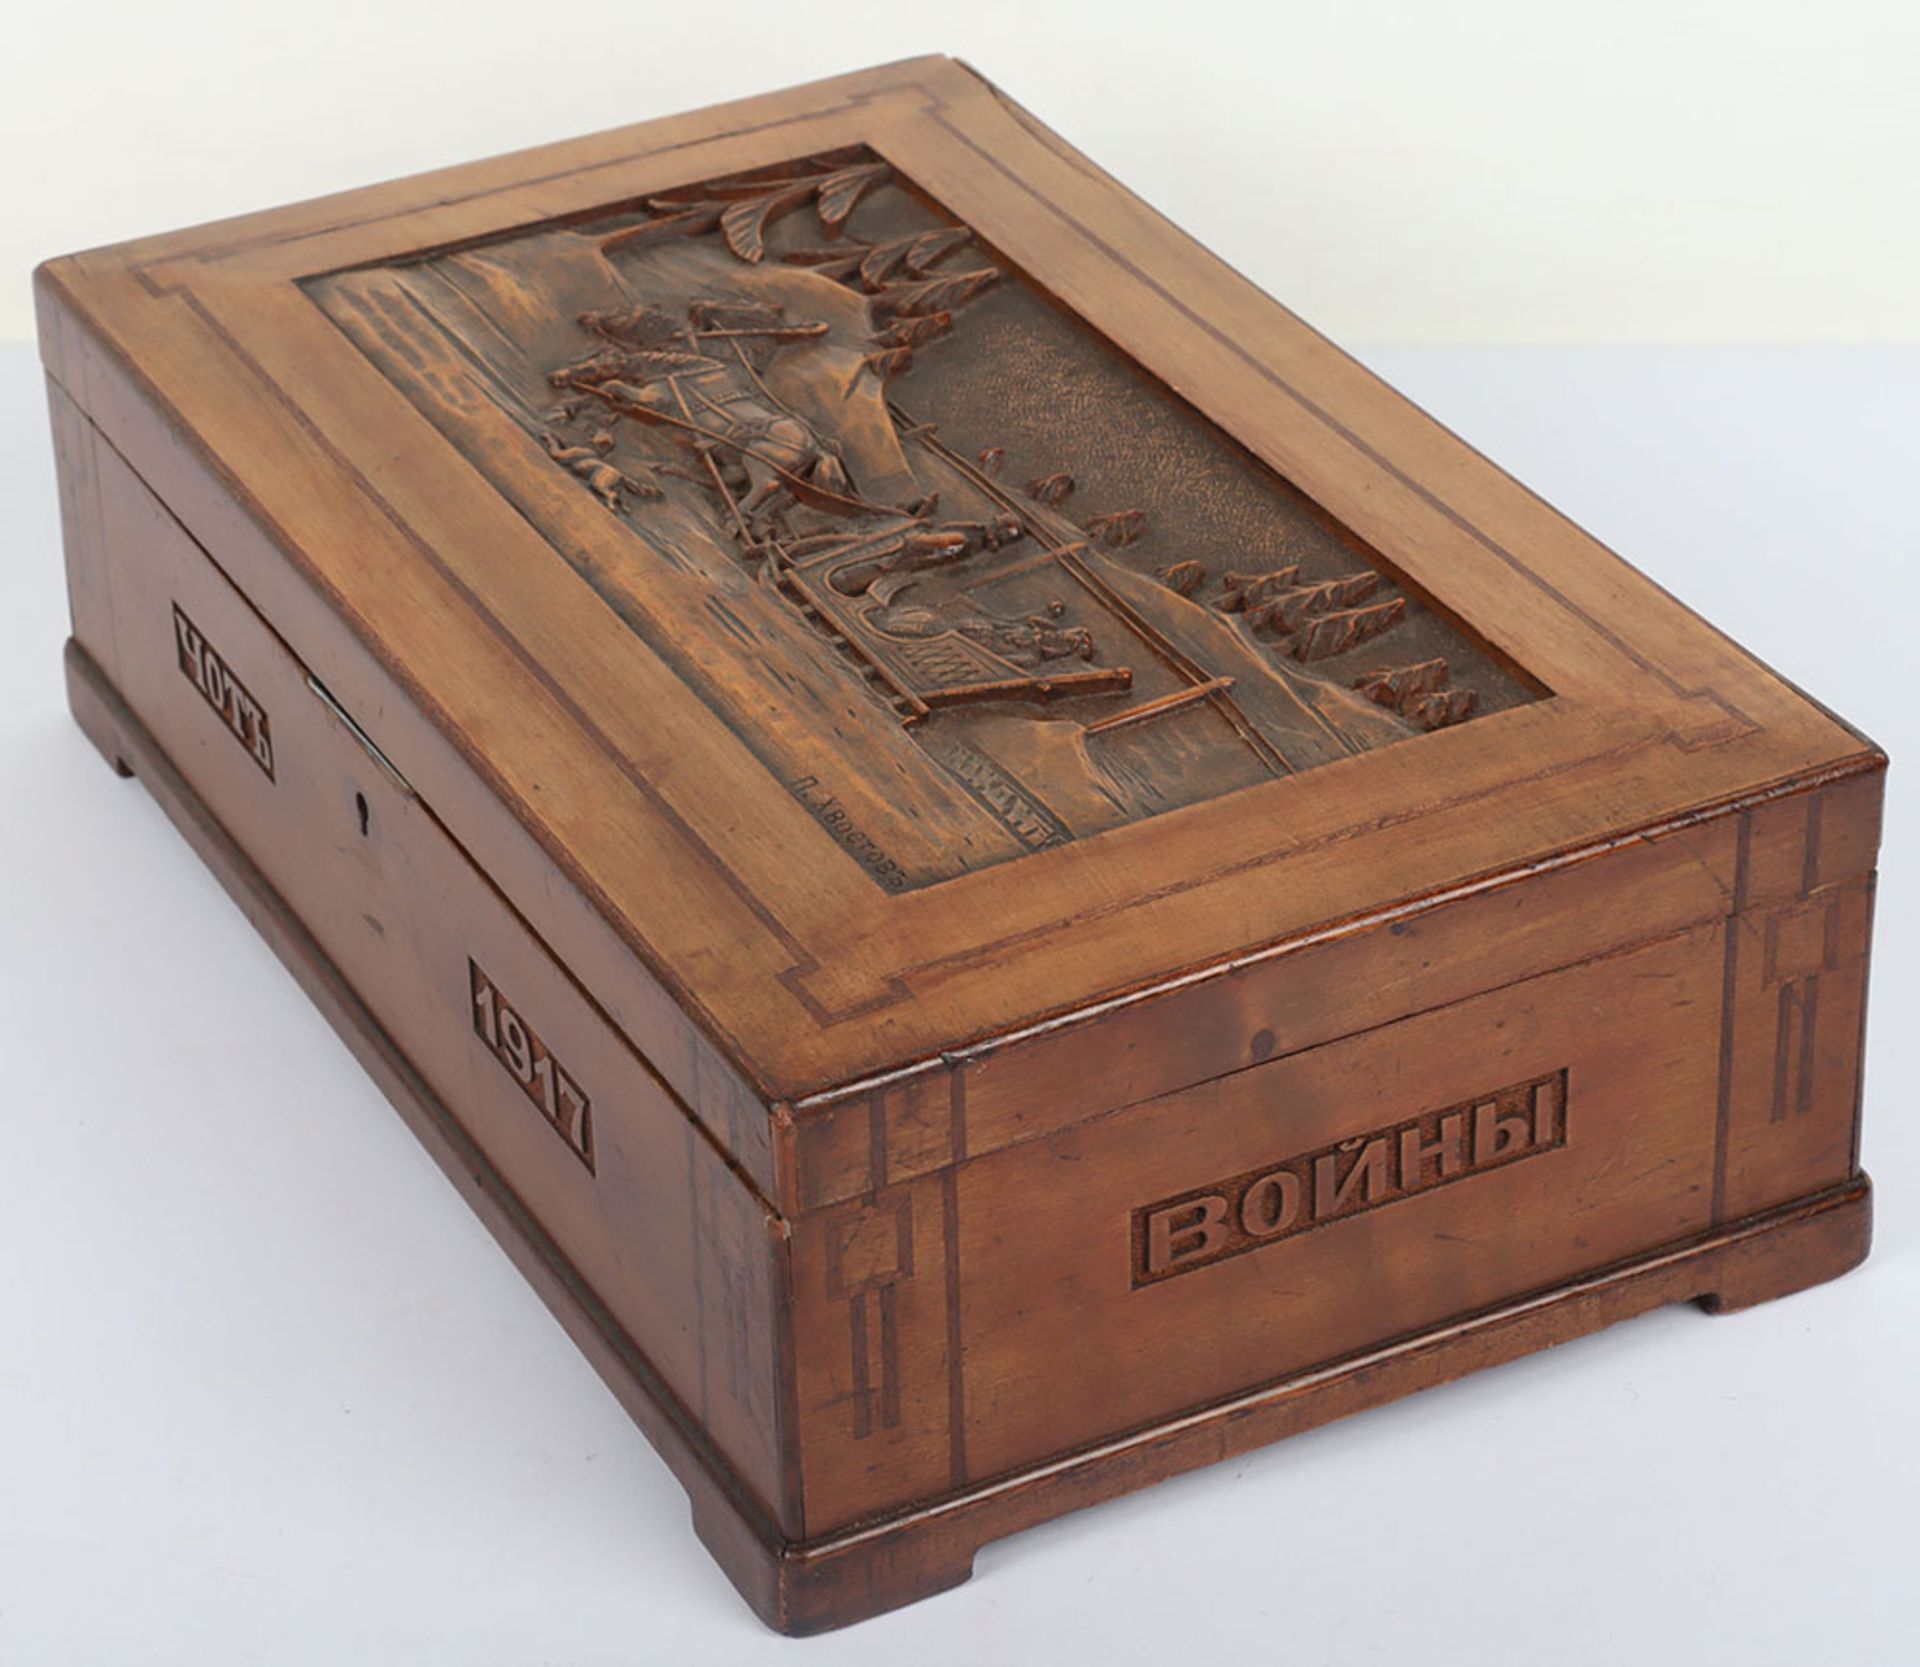 Imperial Russian Carved Memorial of War Box by P. Hvostov - Image 3 of 6